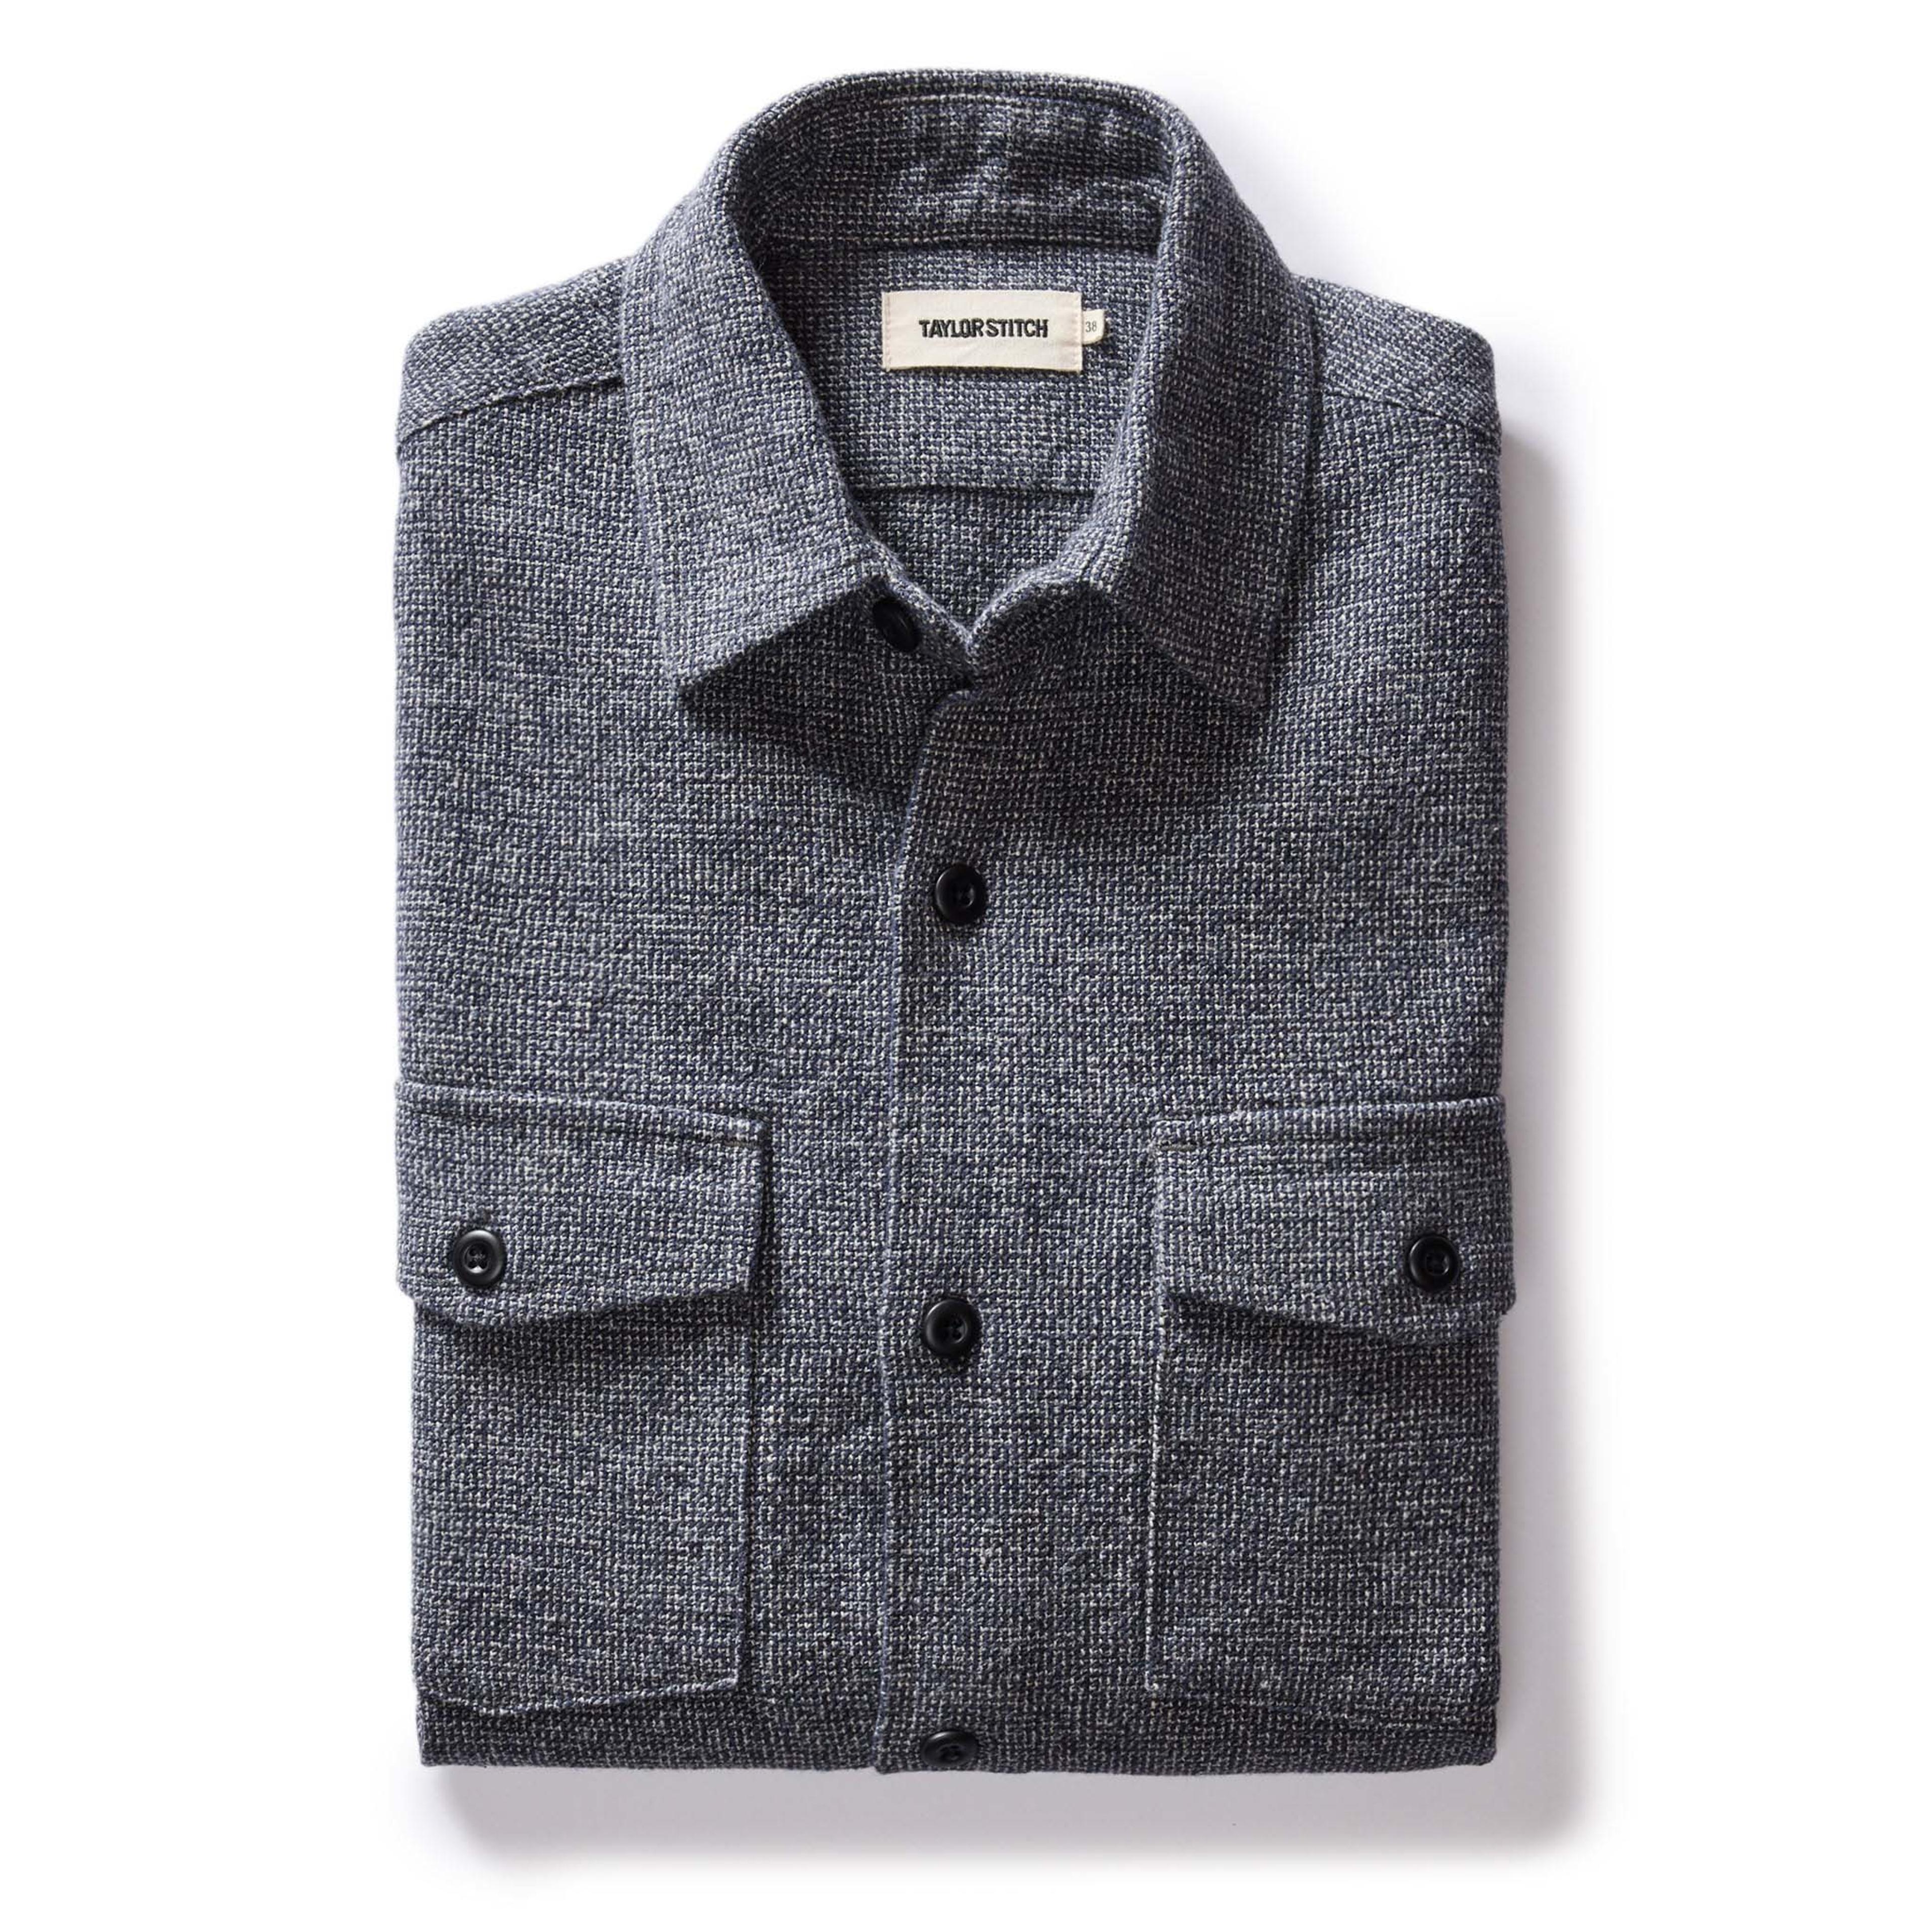 The Point Shirt in Heather Blue Linen Tweed | Taylor Stitch